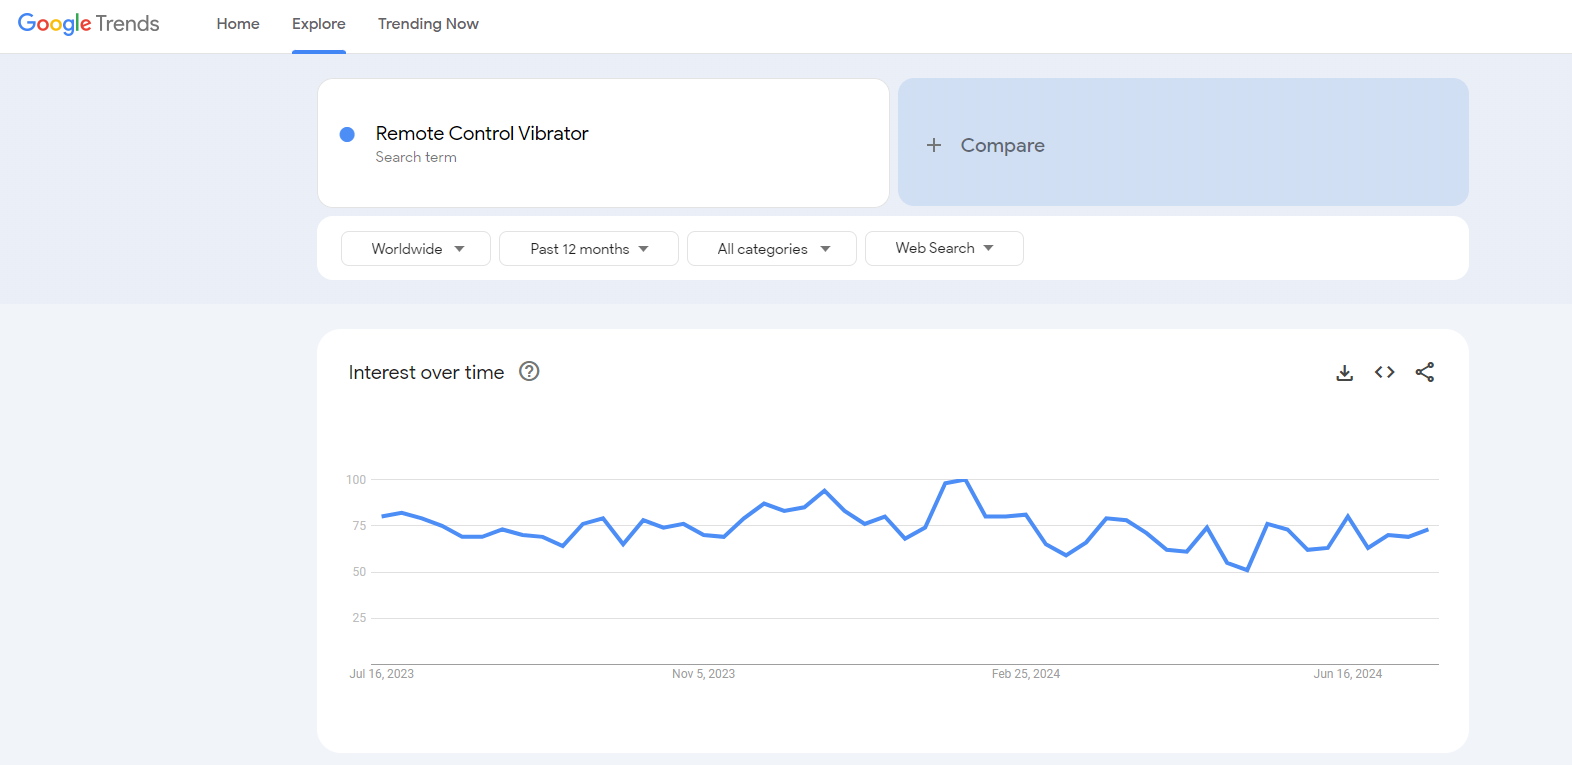 dropship sex toys google trends results for remote control vibrator is high